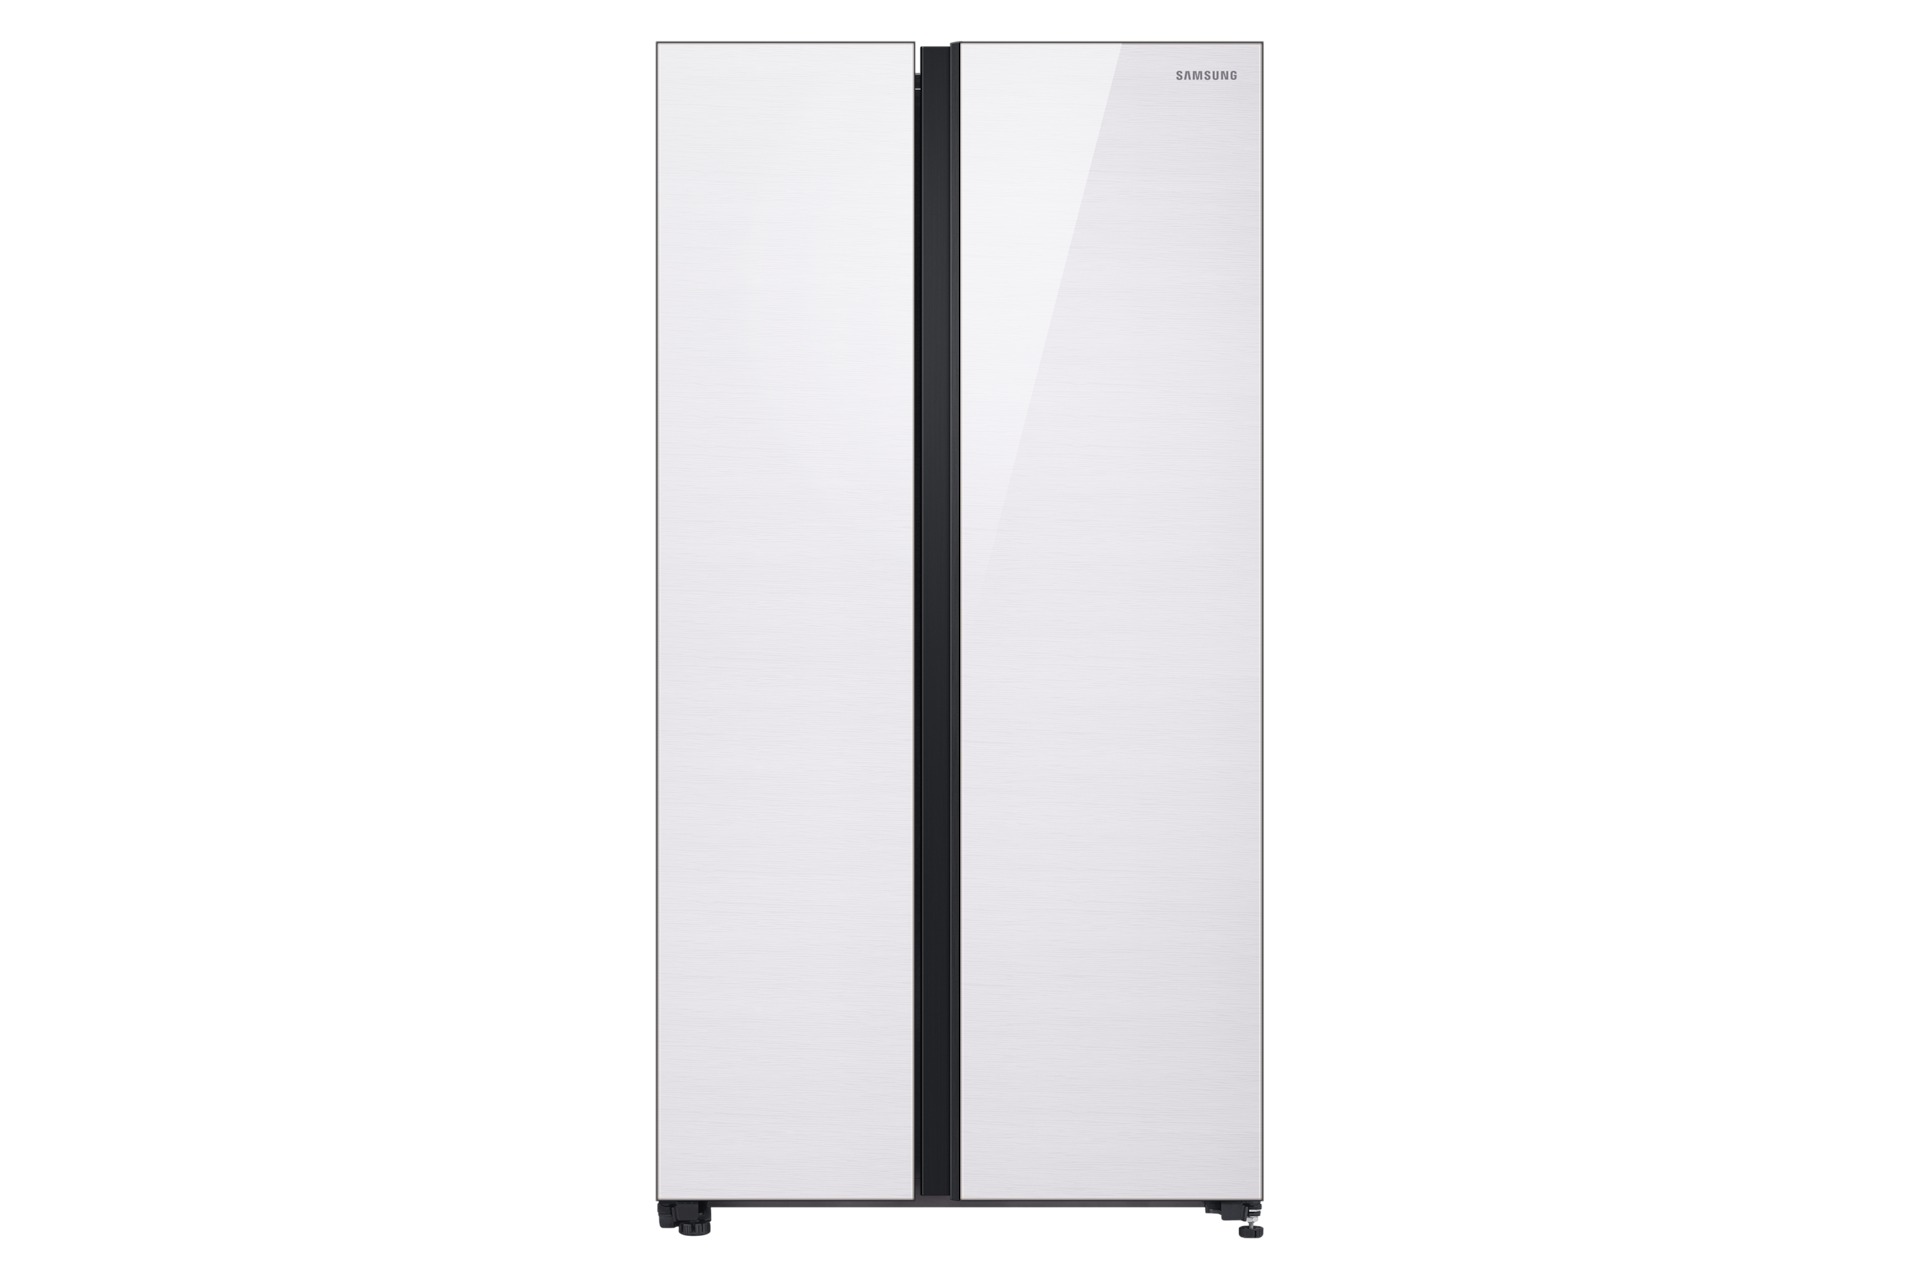 Purchase a 2-door fridge with Spacemax Technology, All-Around Cooling, Power Cool and Power Freeze, and Digital Inverter Compressor. The front white 24.7 cu.ft. Side By Side Classic